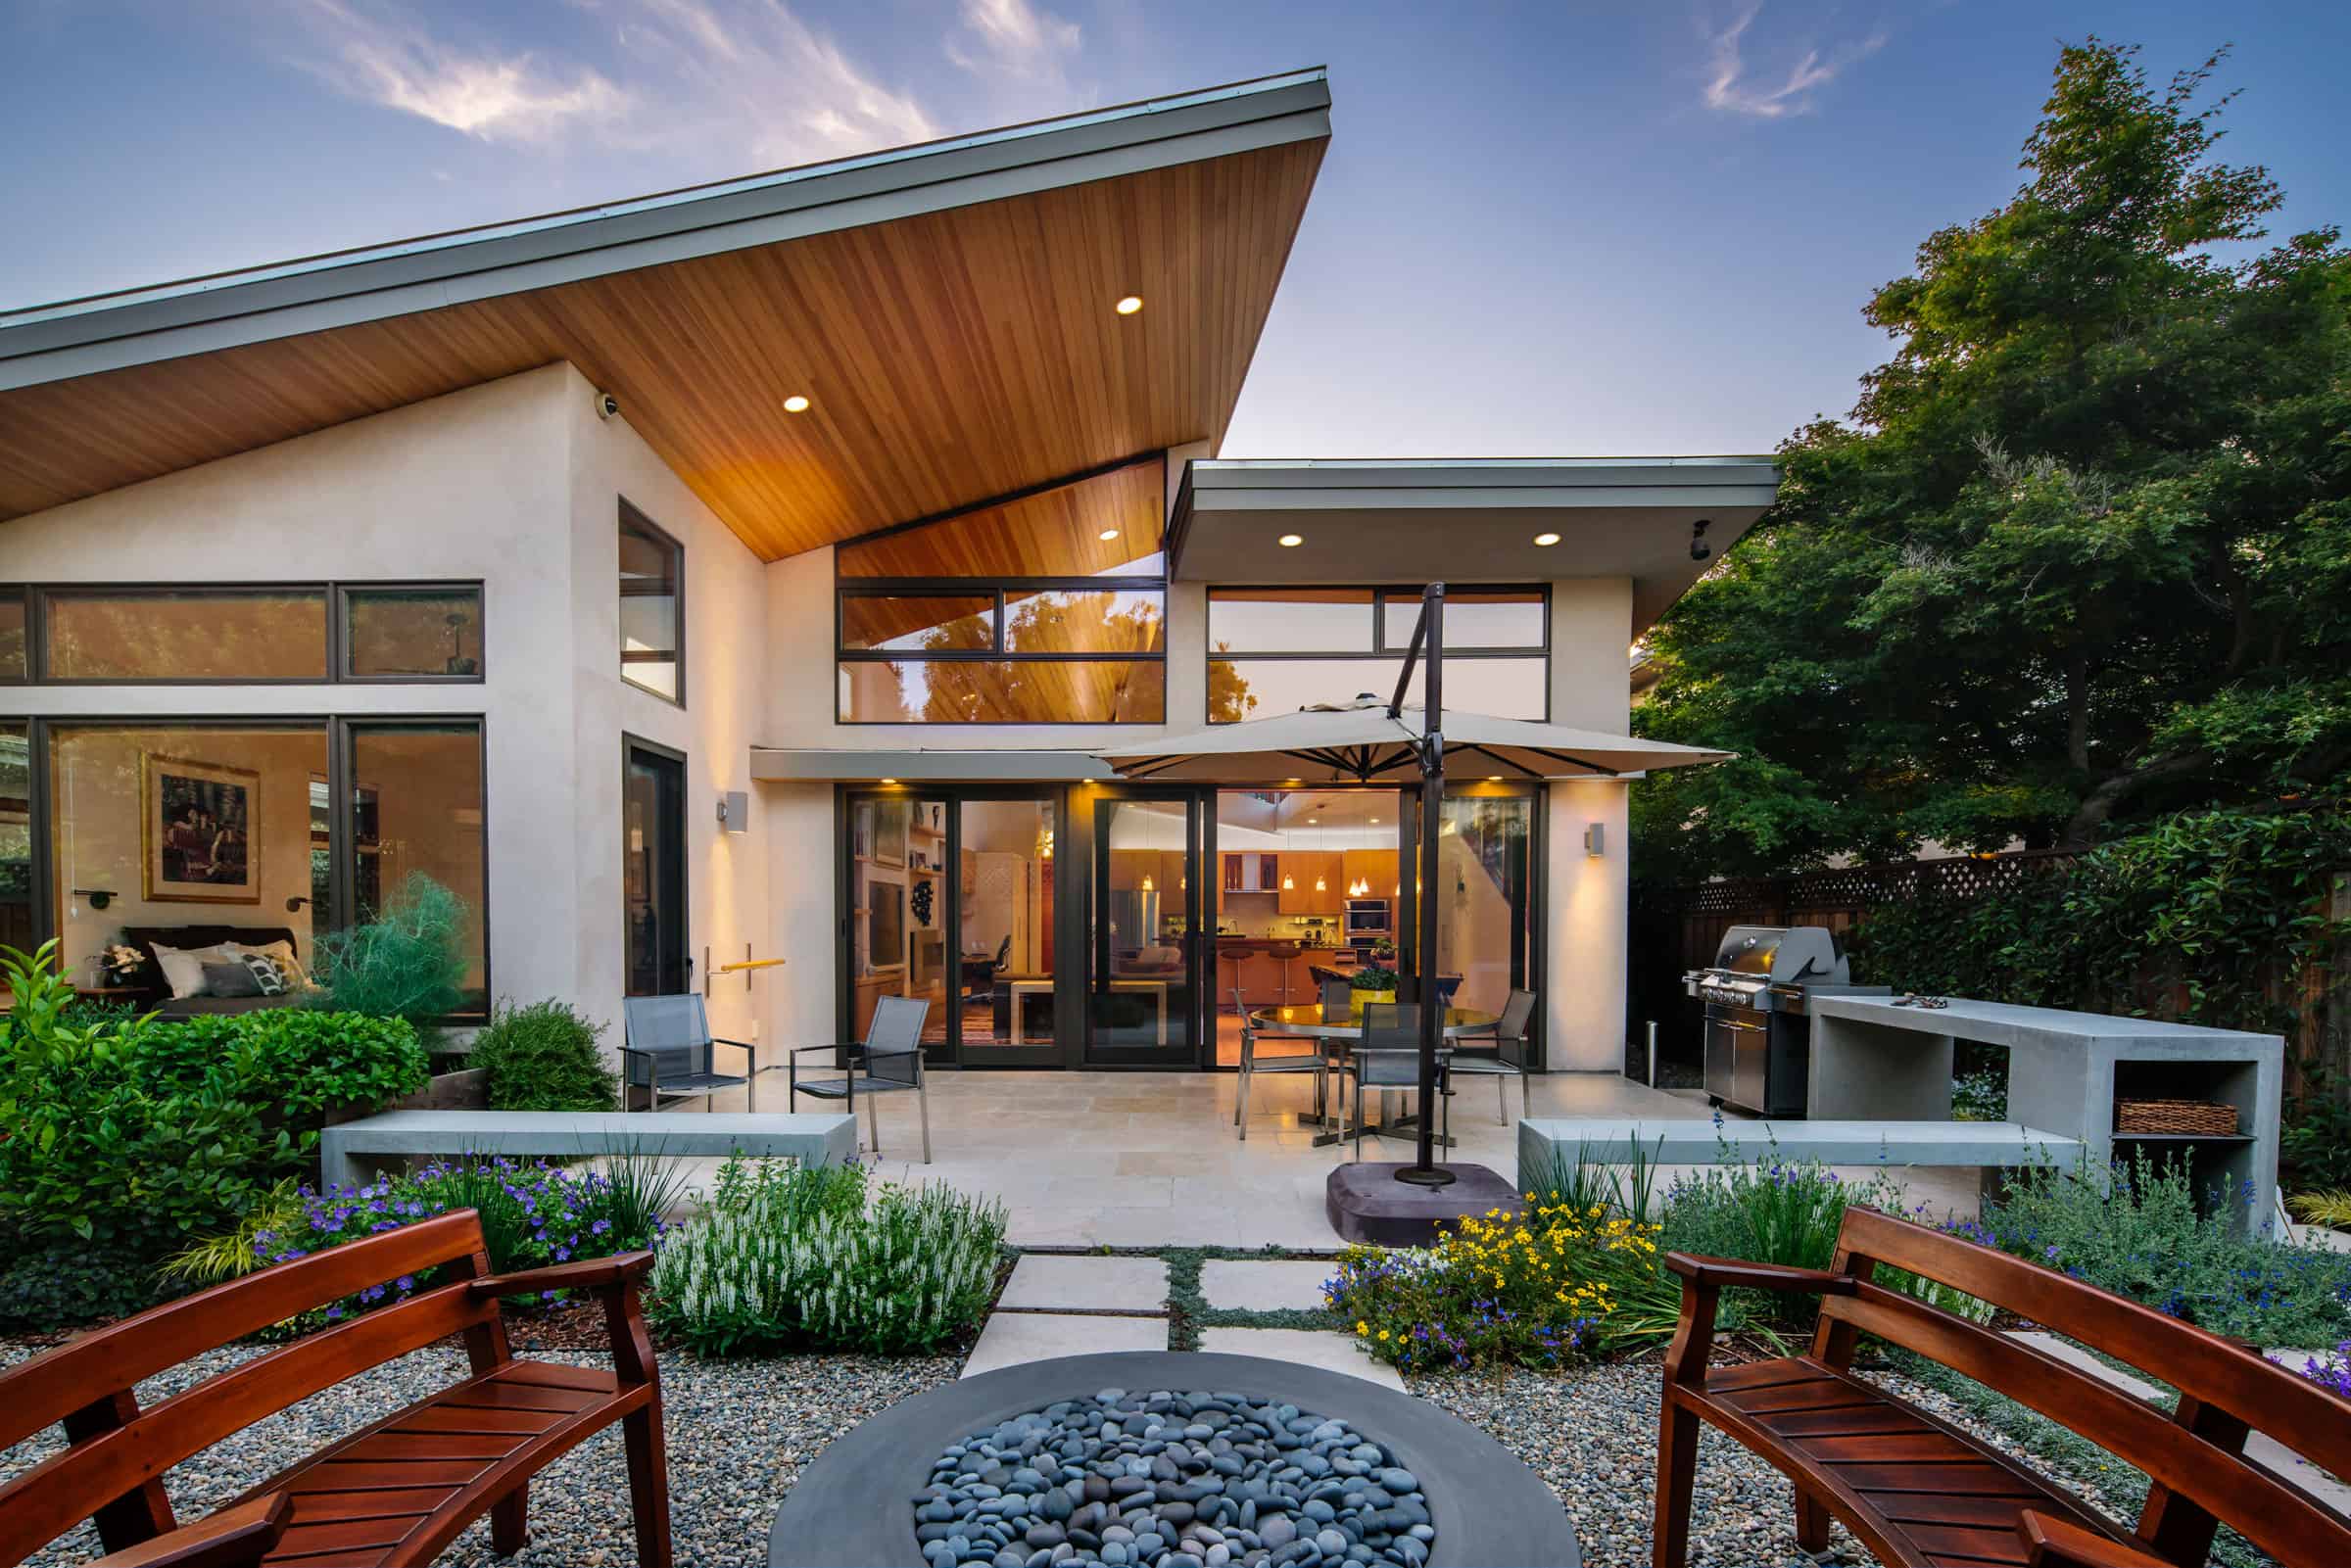 Mountain View contemporary residence, great room open to backyard landscape